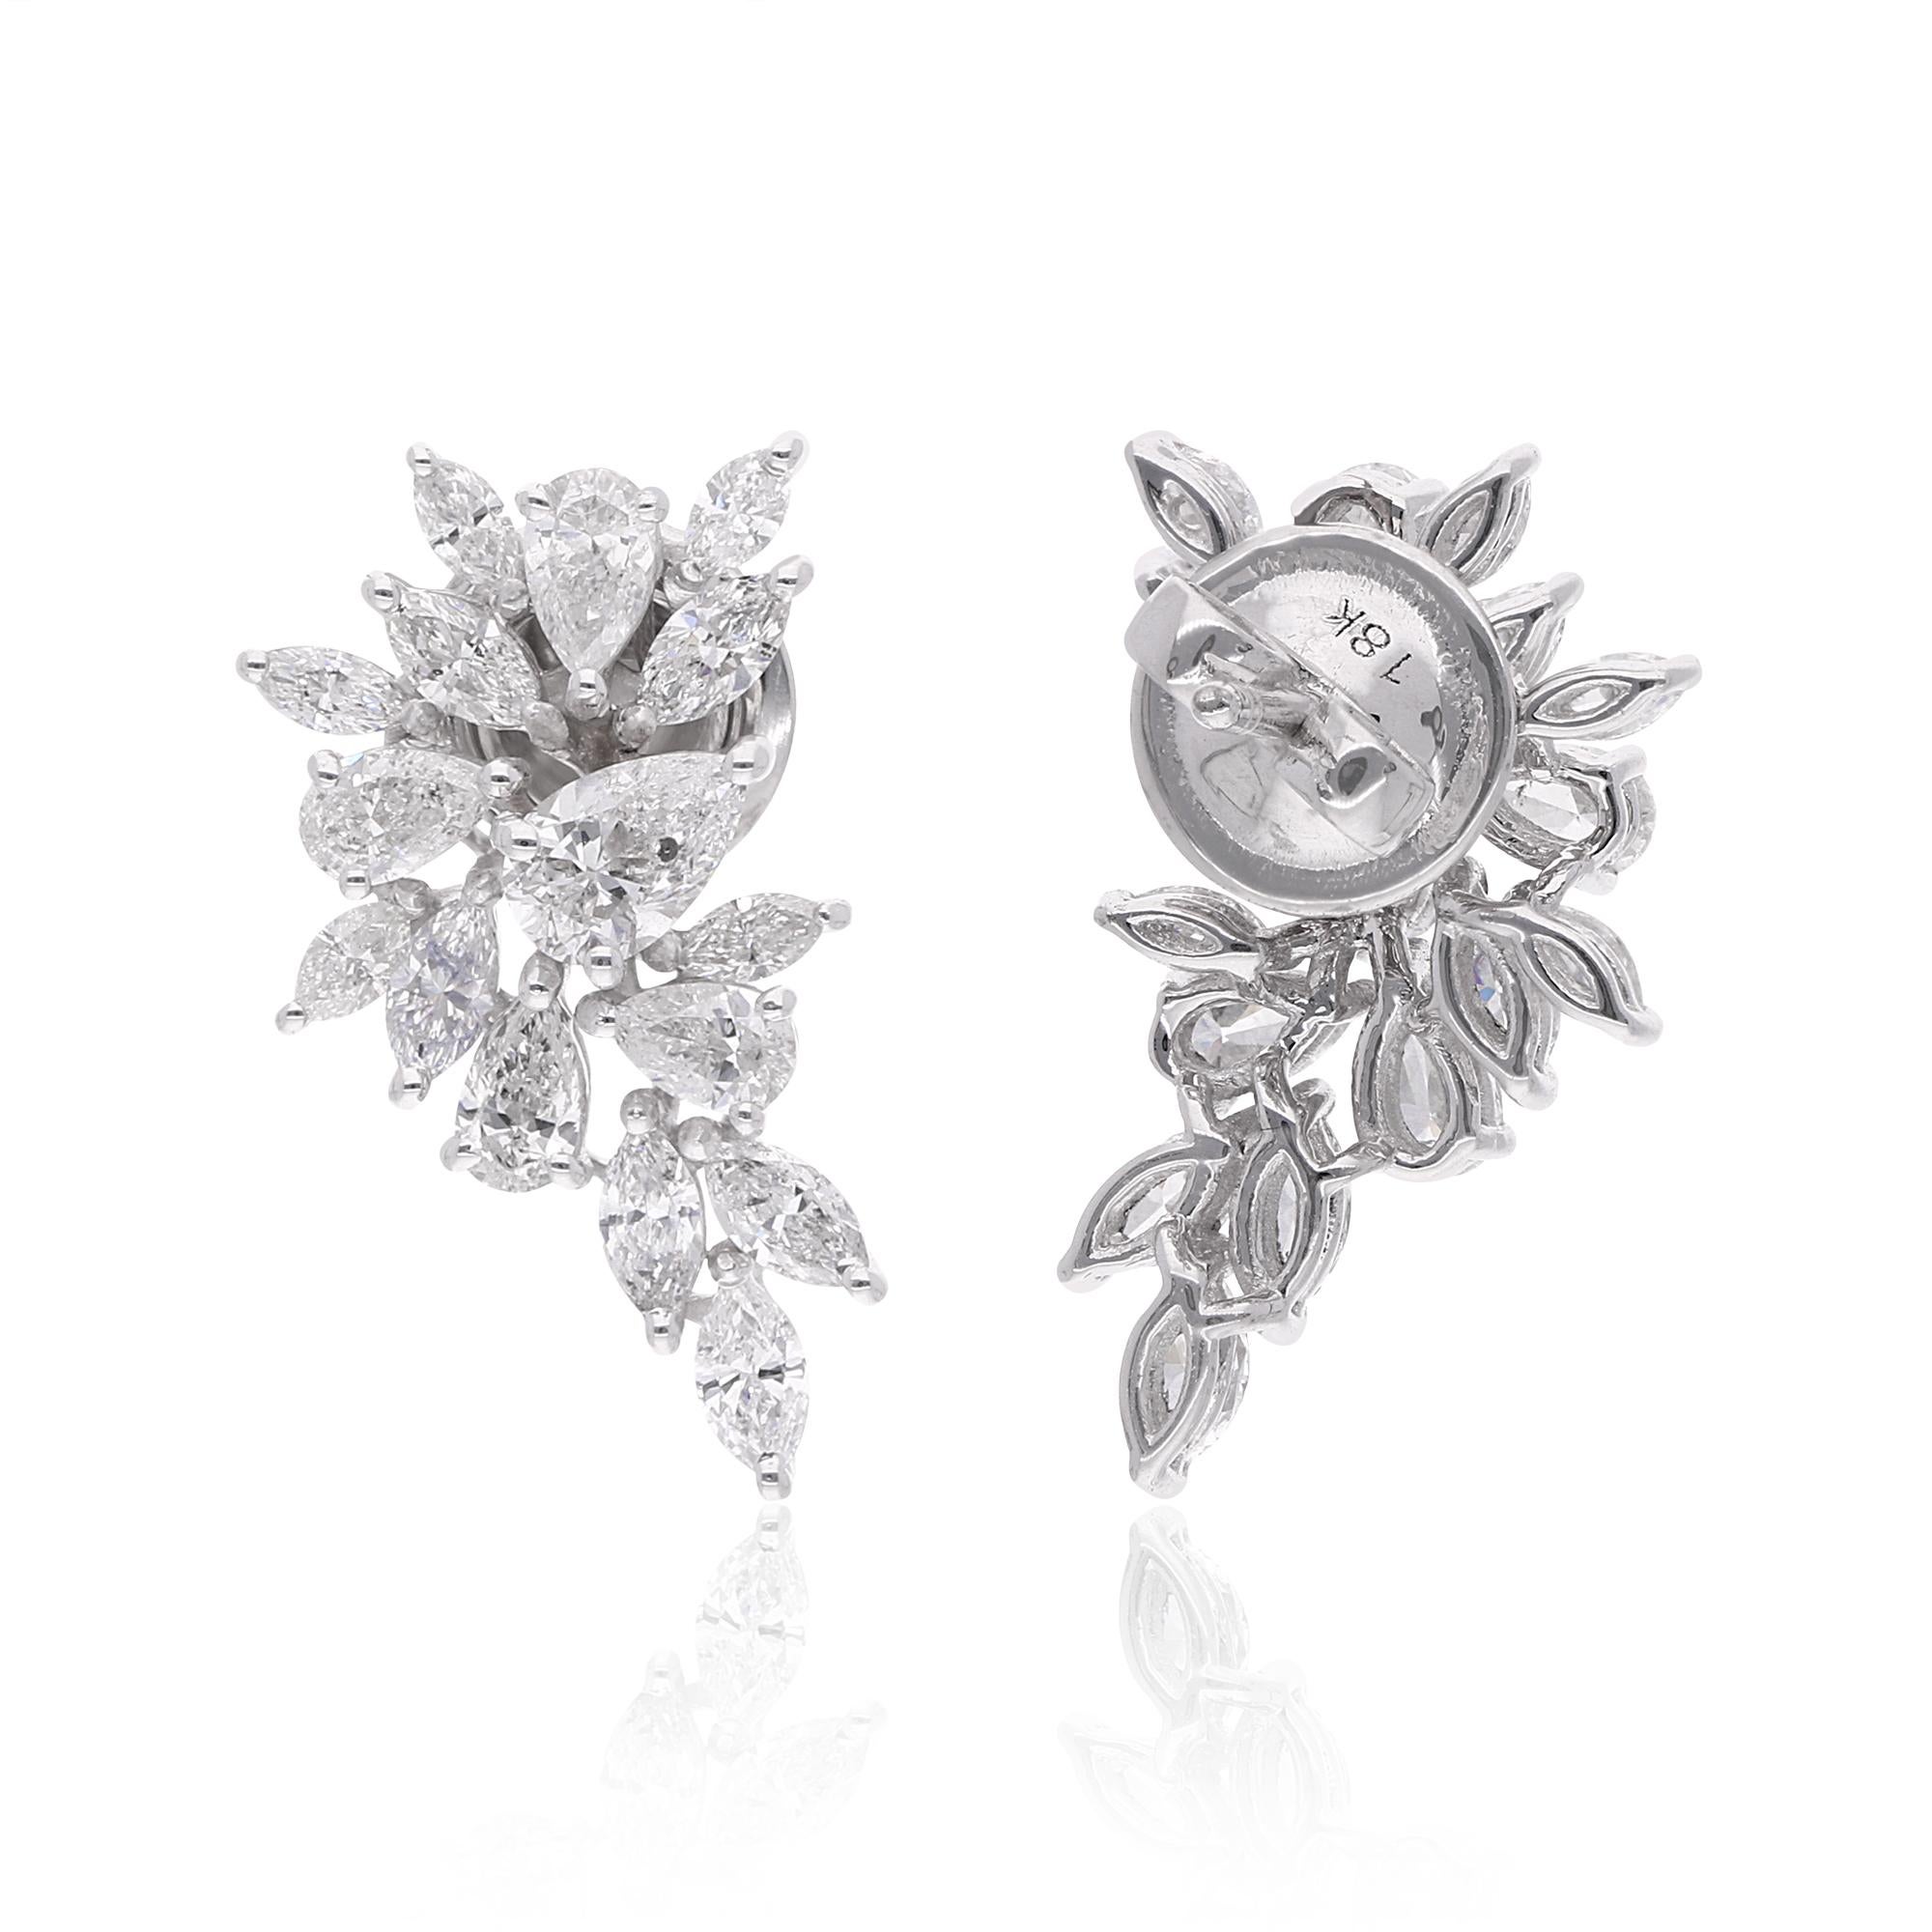 Make yourself trendy and stylish with this 14k White Gold Earrings glittering with Diamond that will add majestic charm and elegance to your look. Exquisitely designed, this Earrings will provide you a classy look.

✧✧Welcome To Our Shop Spectrum